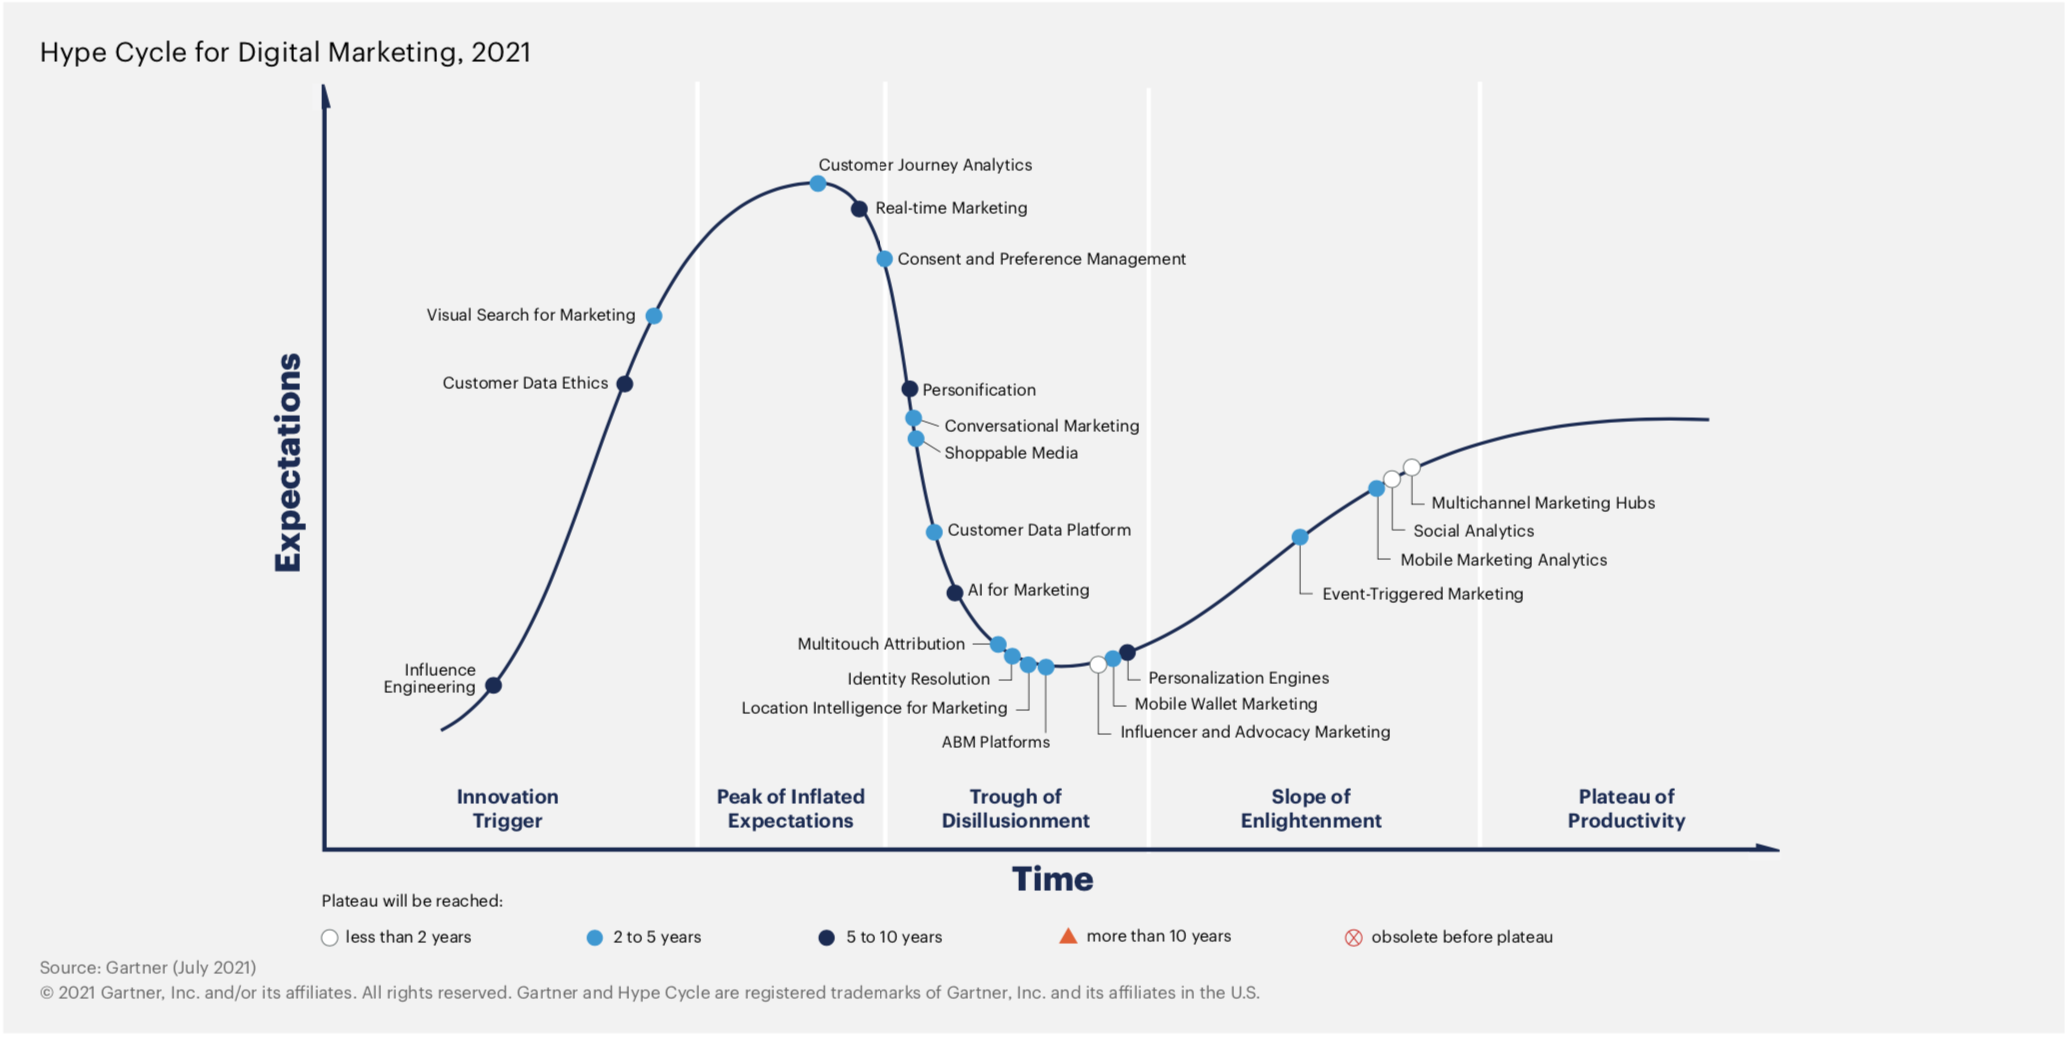 The Hype Cycle for Digital Marketing 2021